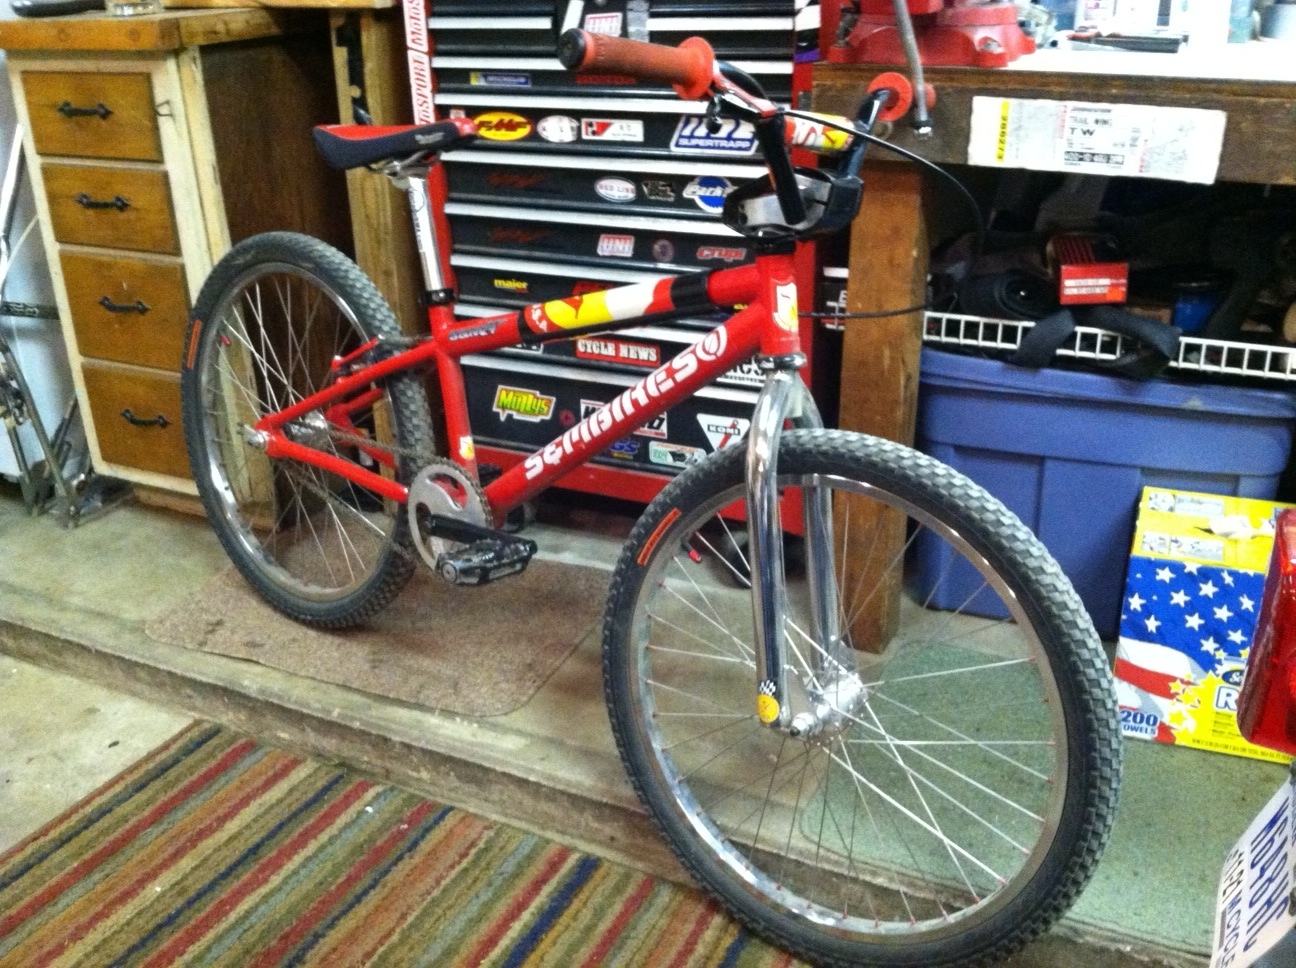 S M Rv24 Build Riding Research Collecting Bmx Society Community Forums